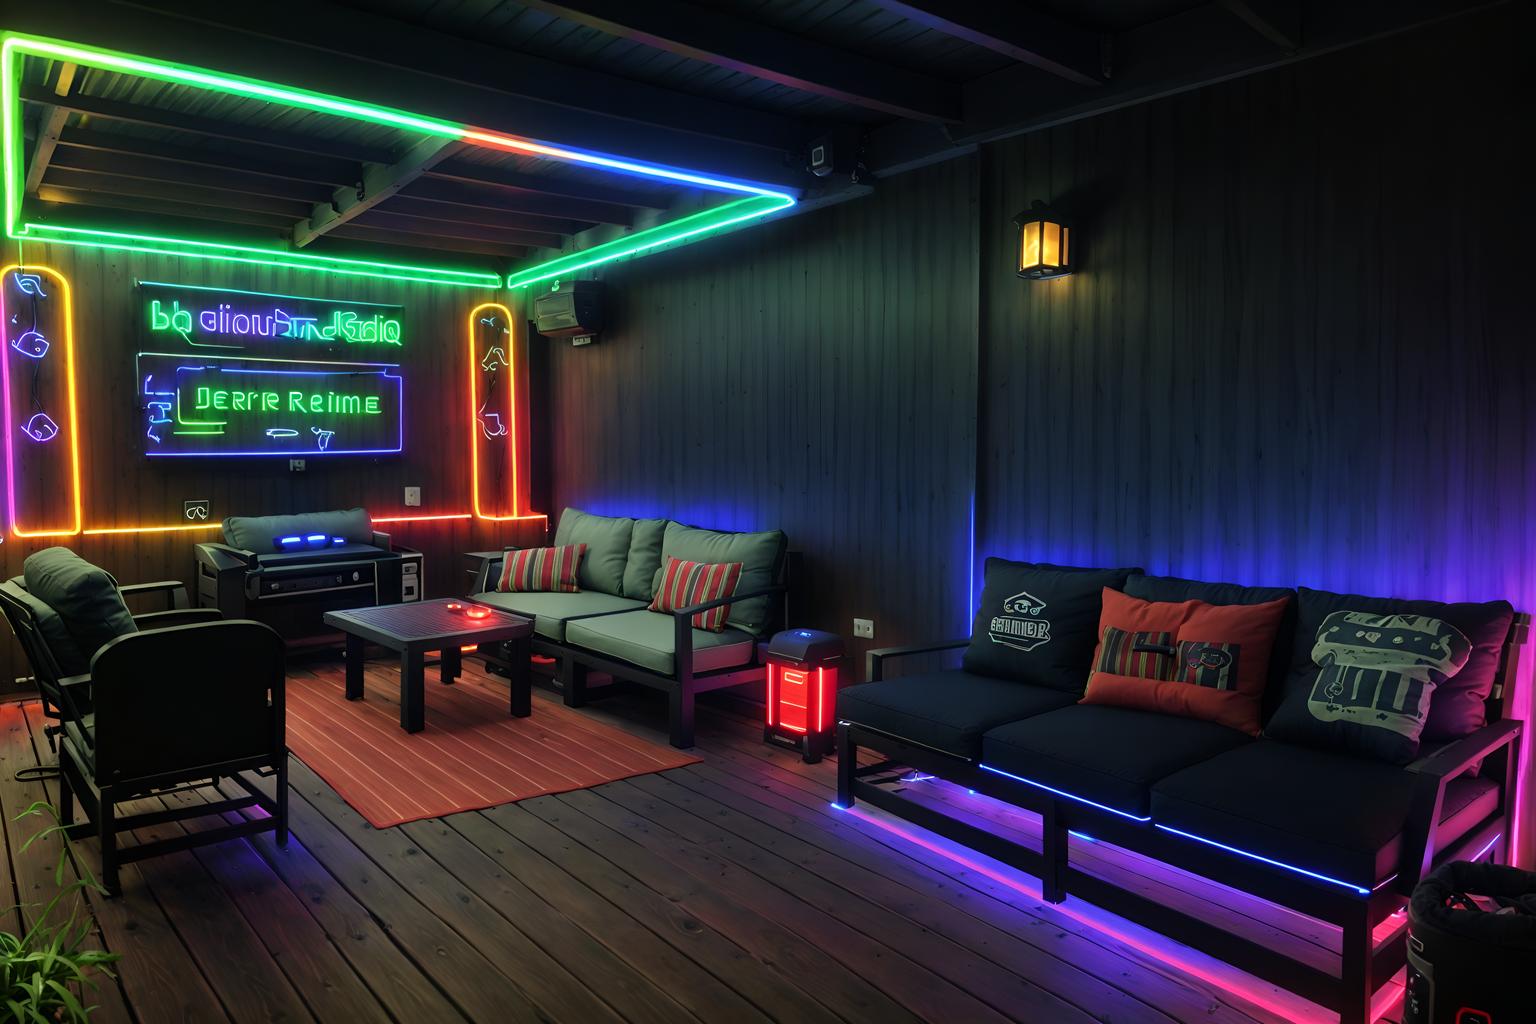 gaming room-style designed (outdoor patio ) with barbeque or grill and grass and plant and deck with deck chairs and patio couch with pillows and barbeque or grill. . with dark room and neon letters on wall and neon lights and speakers and multiple displays and purple, red and blue fade light and computer desk with computer displays and keyboard and dark walls. . cinematic photo, highly detailed, cinematic lighting, ultra-detailed, ultrarealistic, photorealism, 8k. gaming room design style. masterpiece, cinematic light, ultrarealistic+, photorealistic+, 8k, raw photo, realistic, sharp focus on eyes, (symmetrical eyes), (intact eyes), hyperrealistic, highest quality, best quality, , highly detailed, masterpiece, best quality, extremely detailed 8k wallpaper, masterpiece, best quality, ultra-detailed, best shadow, detailed background, detailed face, detailed eyes, high contrast, best illumination, detailed face, dulux, caustic, dynamic angle, detailed glow. dramatic lighting. highly detailed, insanely detailed hair, symmetrical, intricate details, professionally retouched, 8k high definition. strong bokeh. award winning photo.